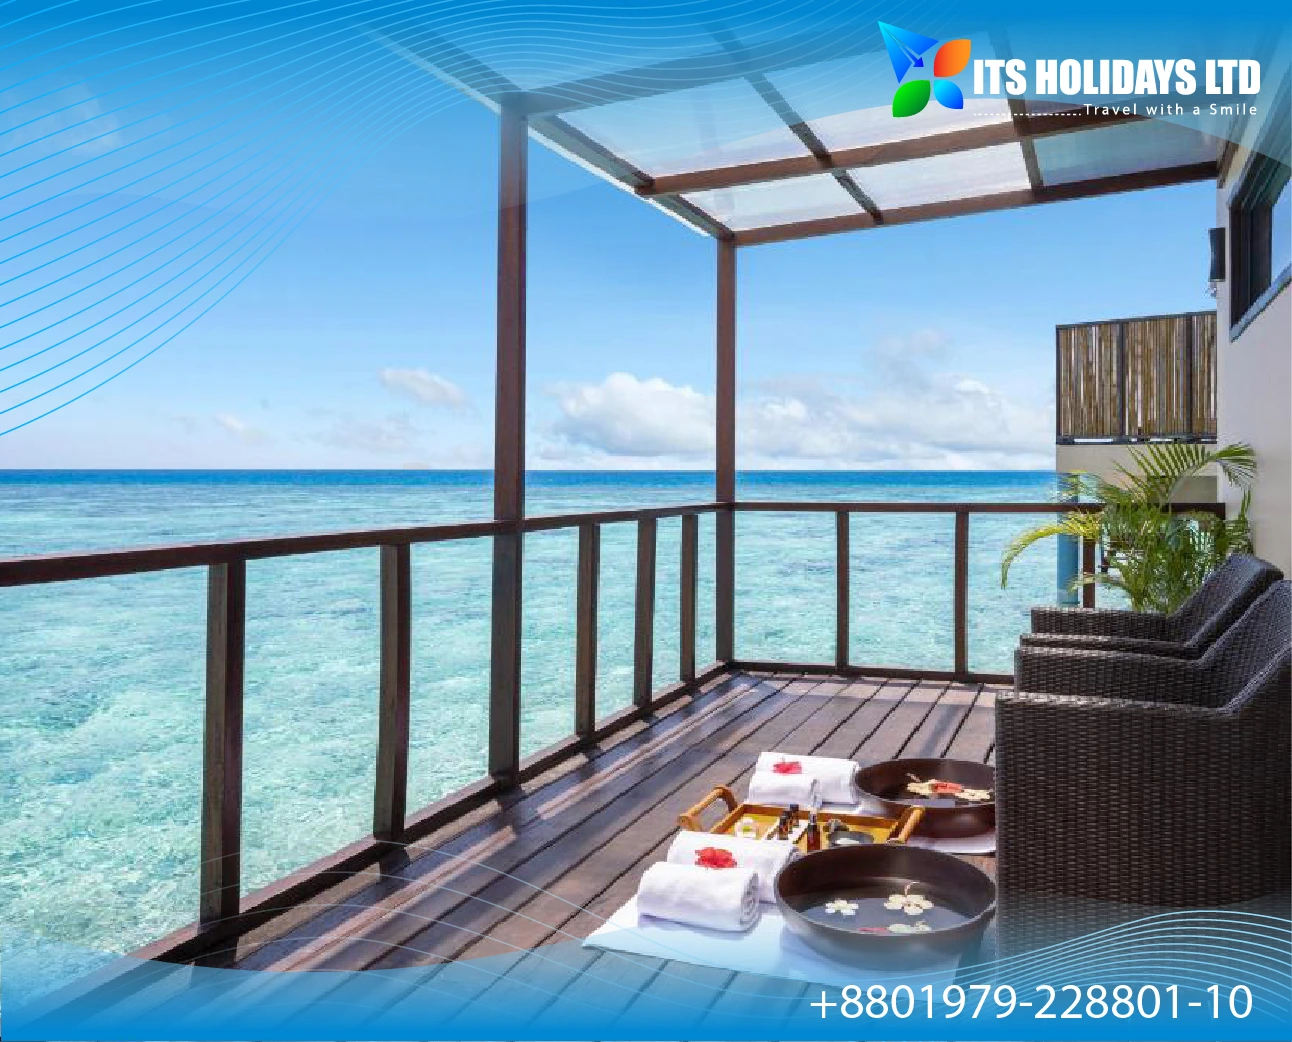 Relax in Maldives Tour Package from Bangladesh - 4